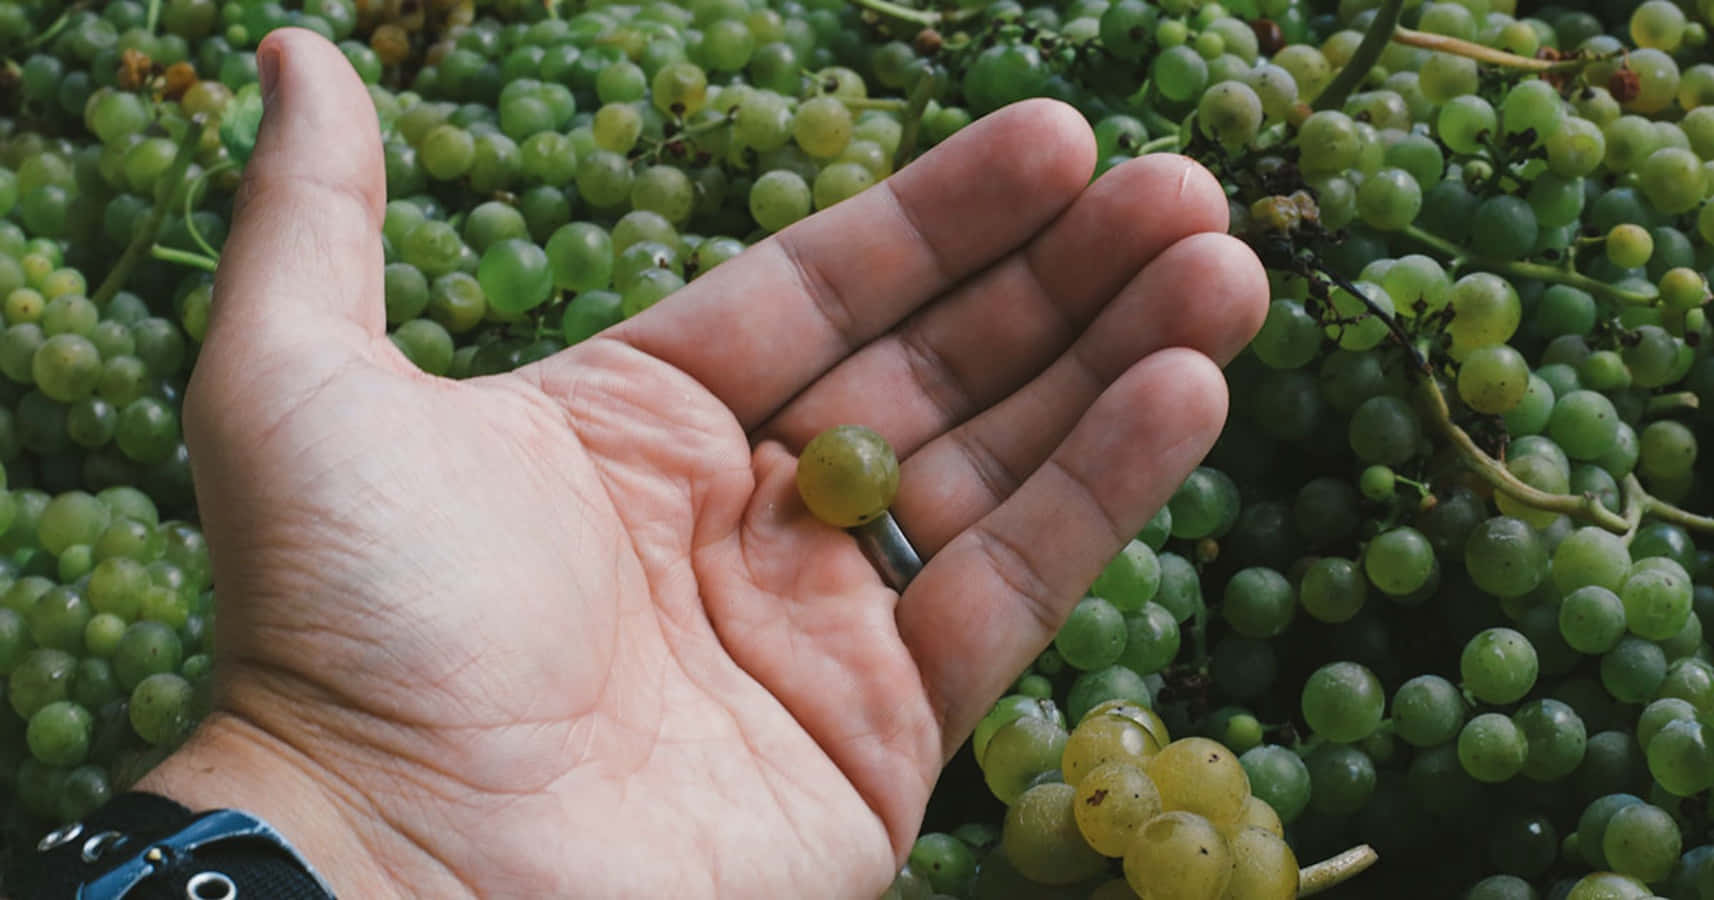 A large cluster of fresh, juicy grapes hang from a vine.